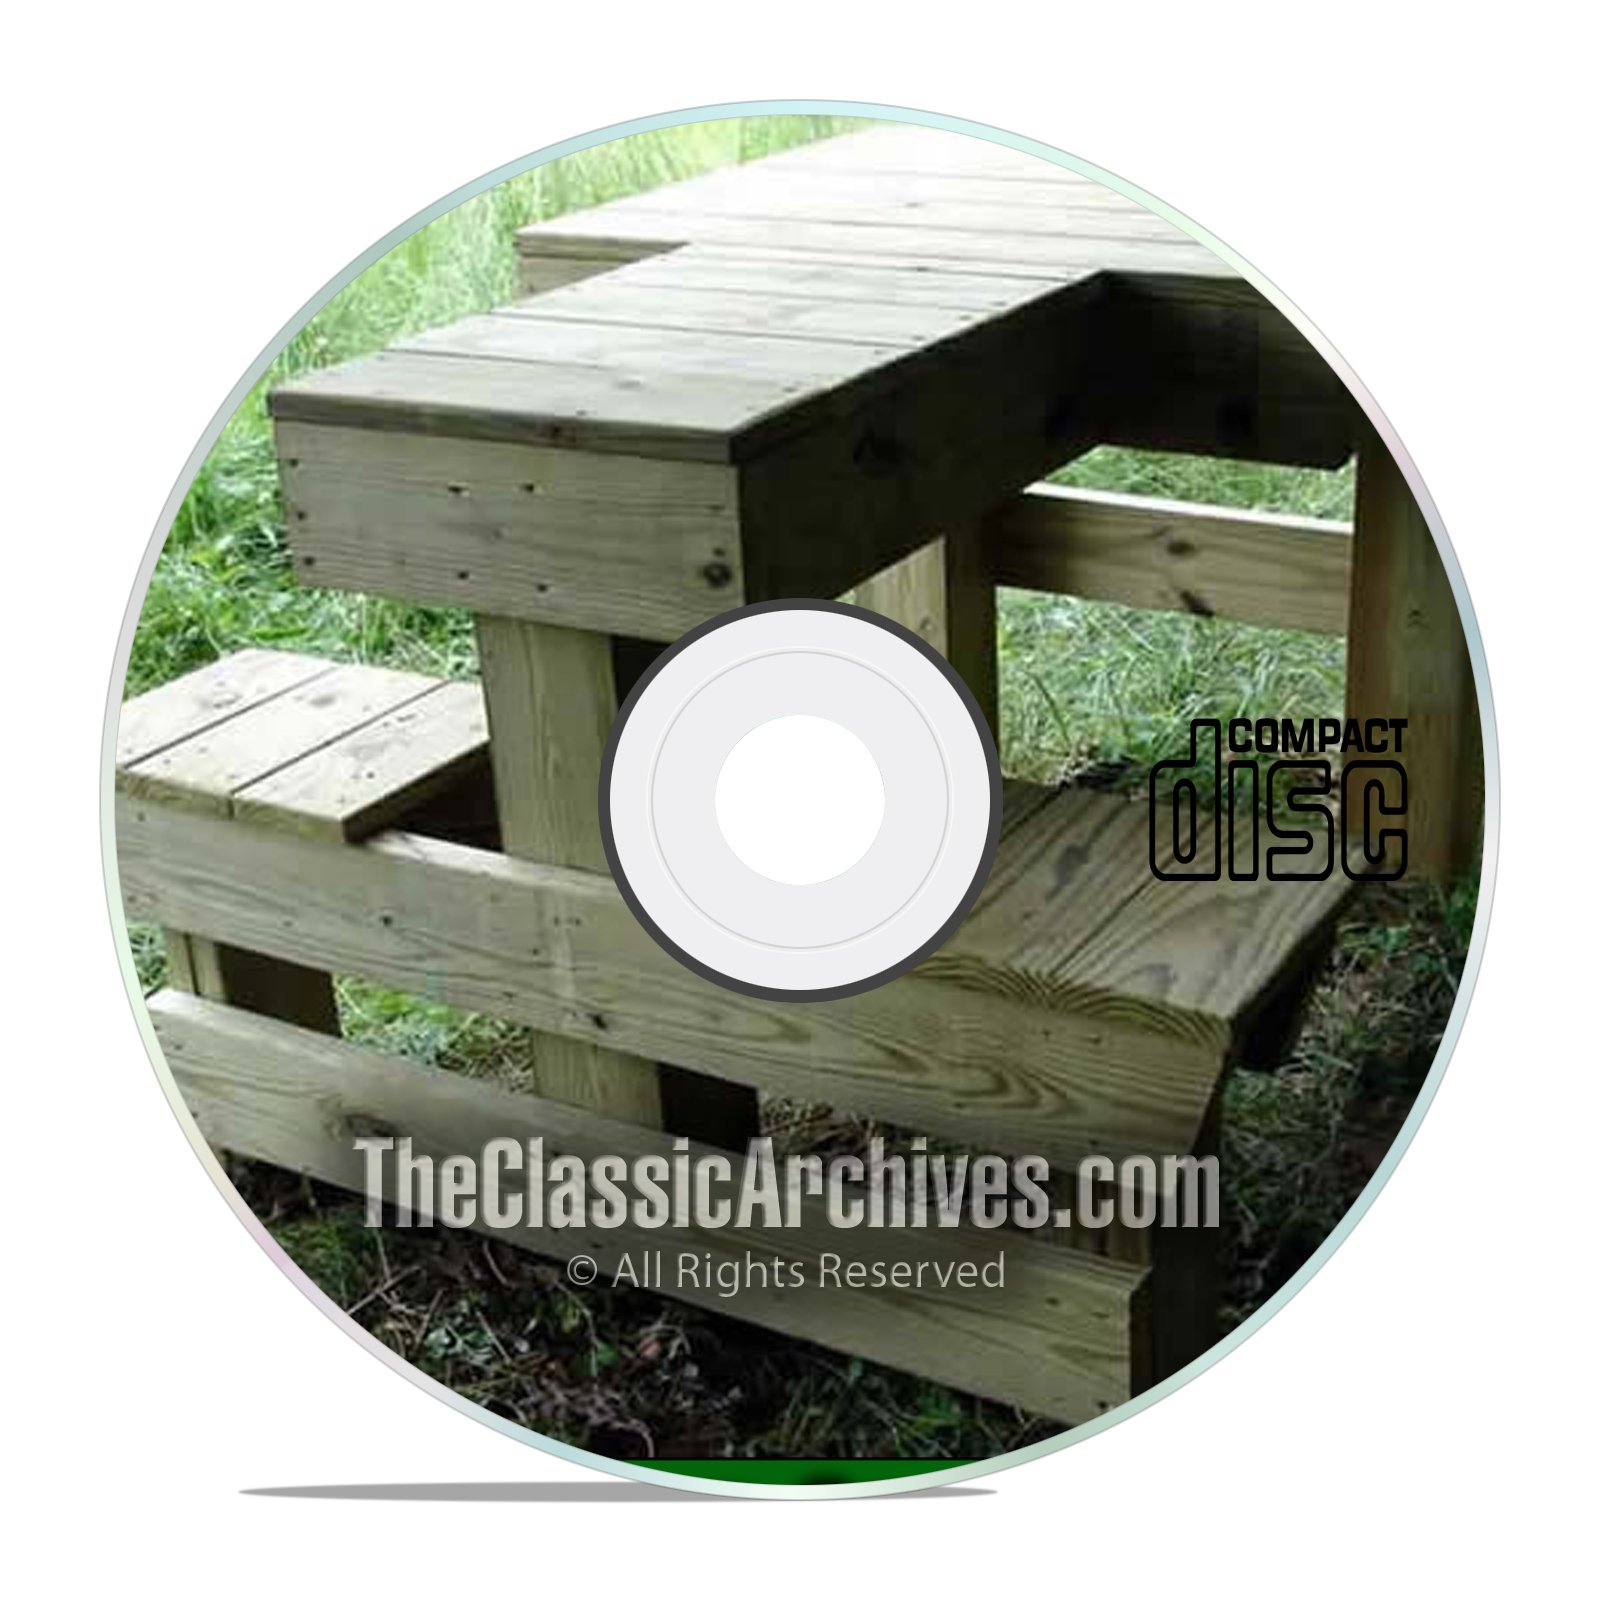 Professional Shooting Bench Plans, Build Your Own Bench, Ammo Books! PDF CD